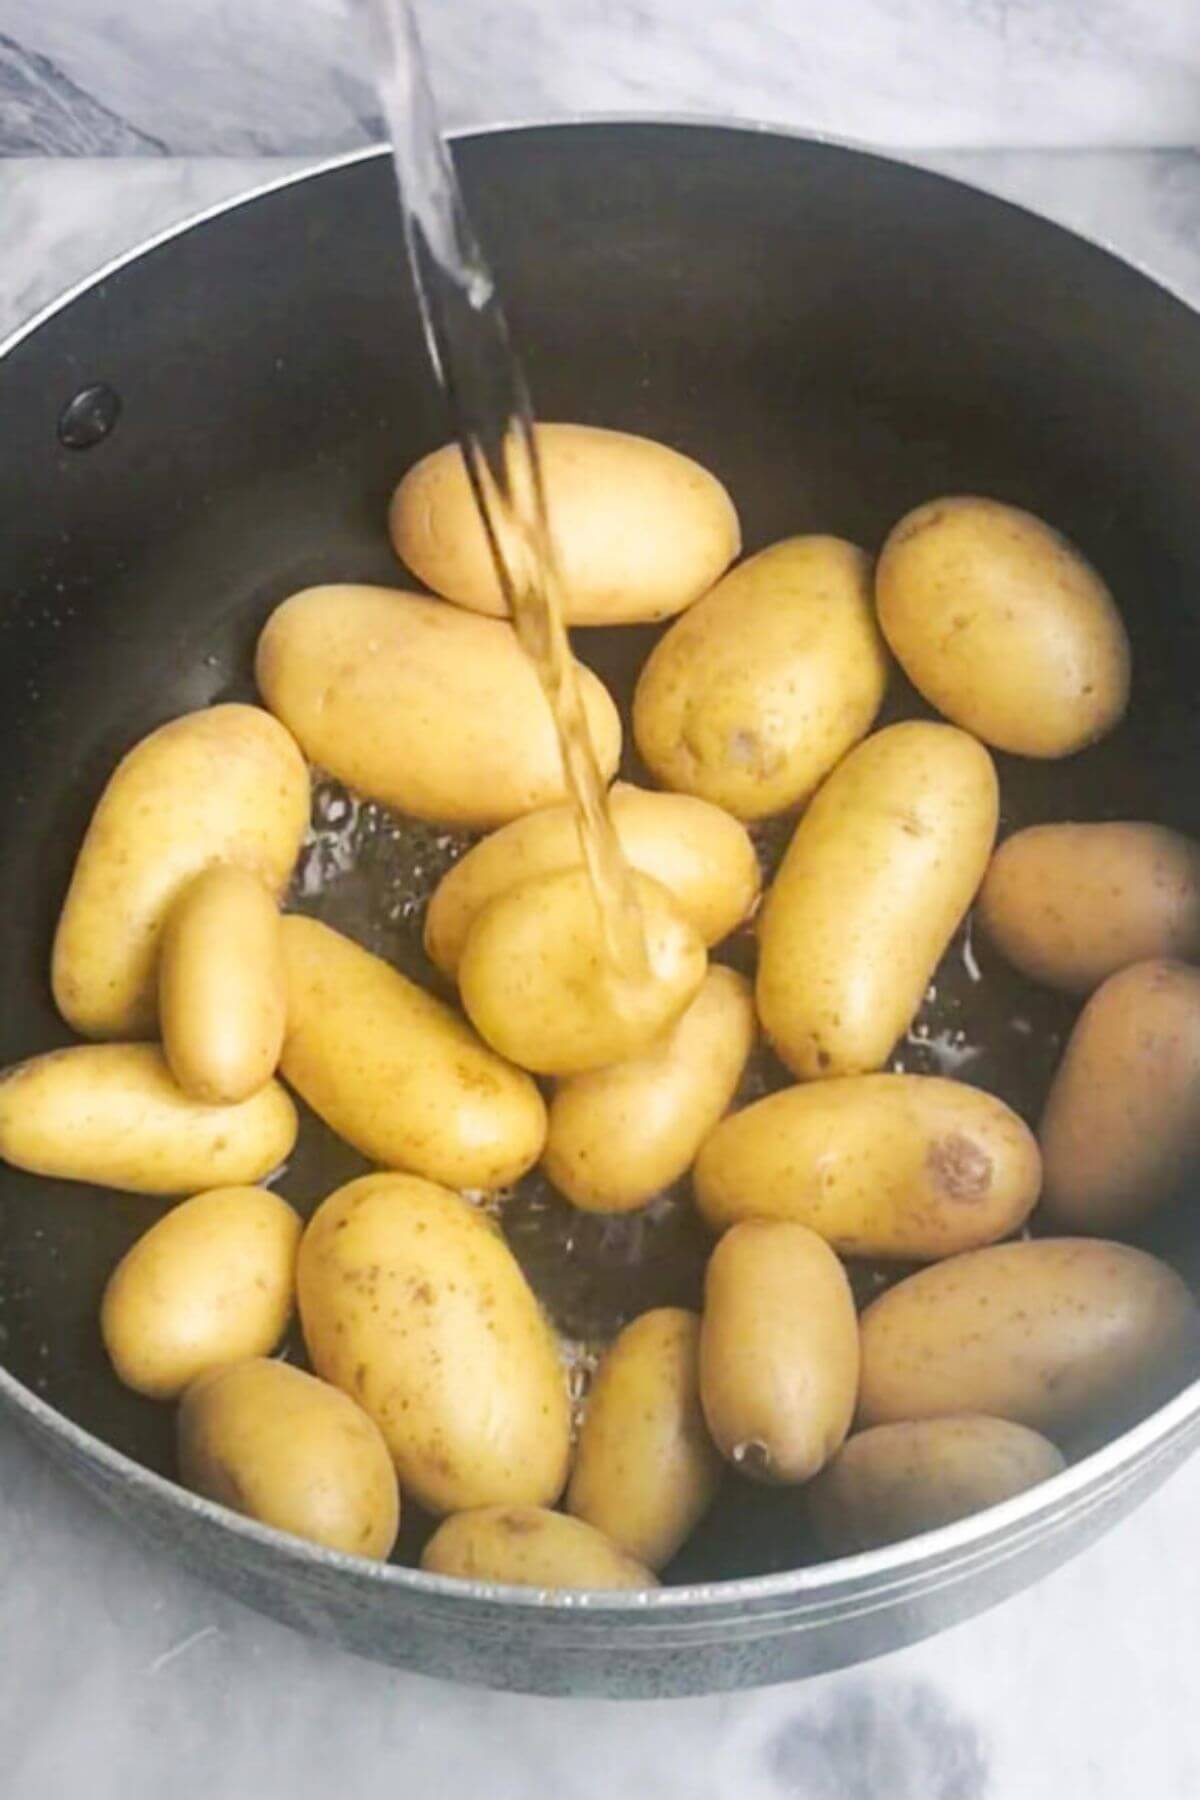 Water being poured into a pot of baby potatoes on a grey marble background.